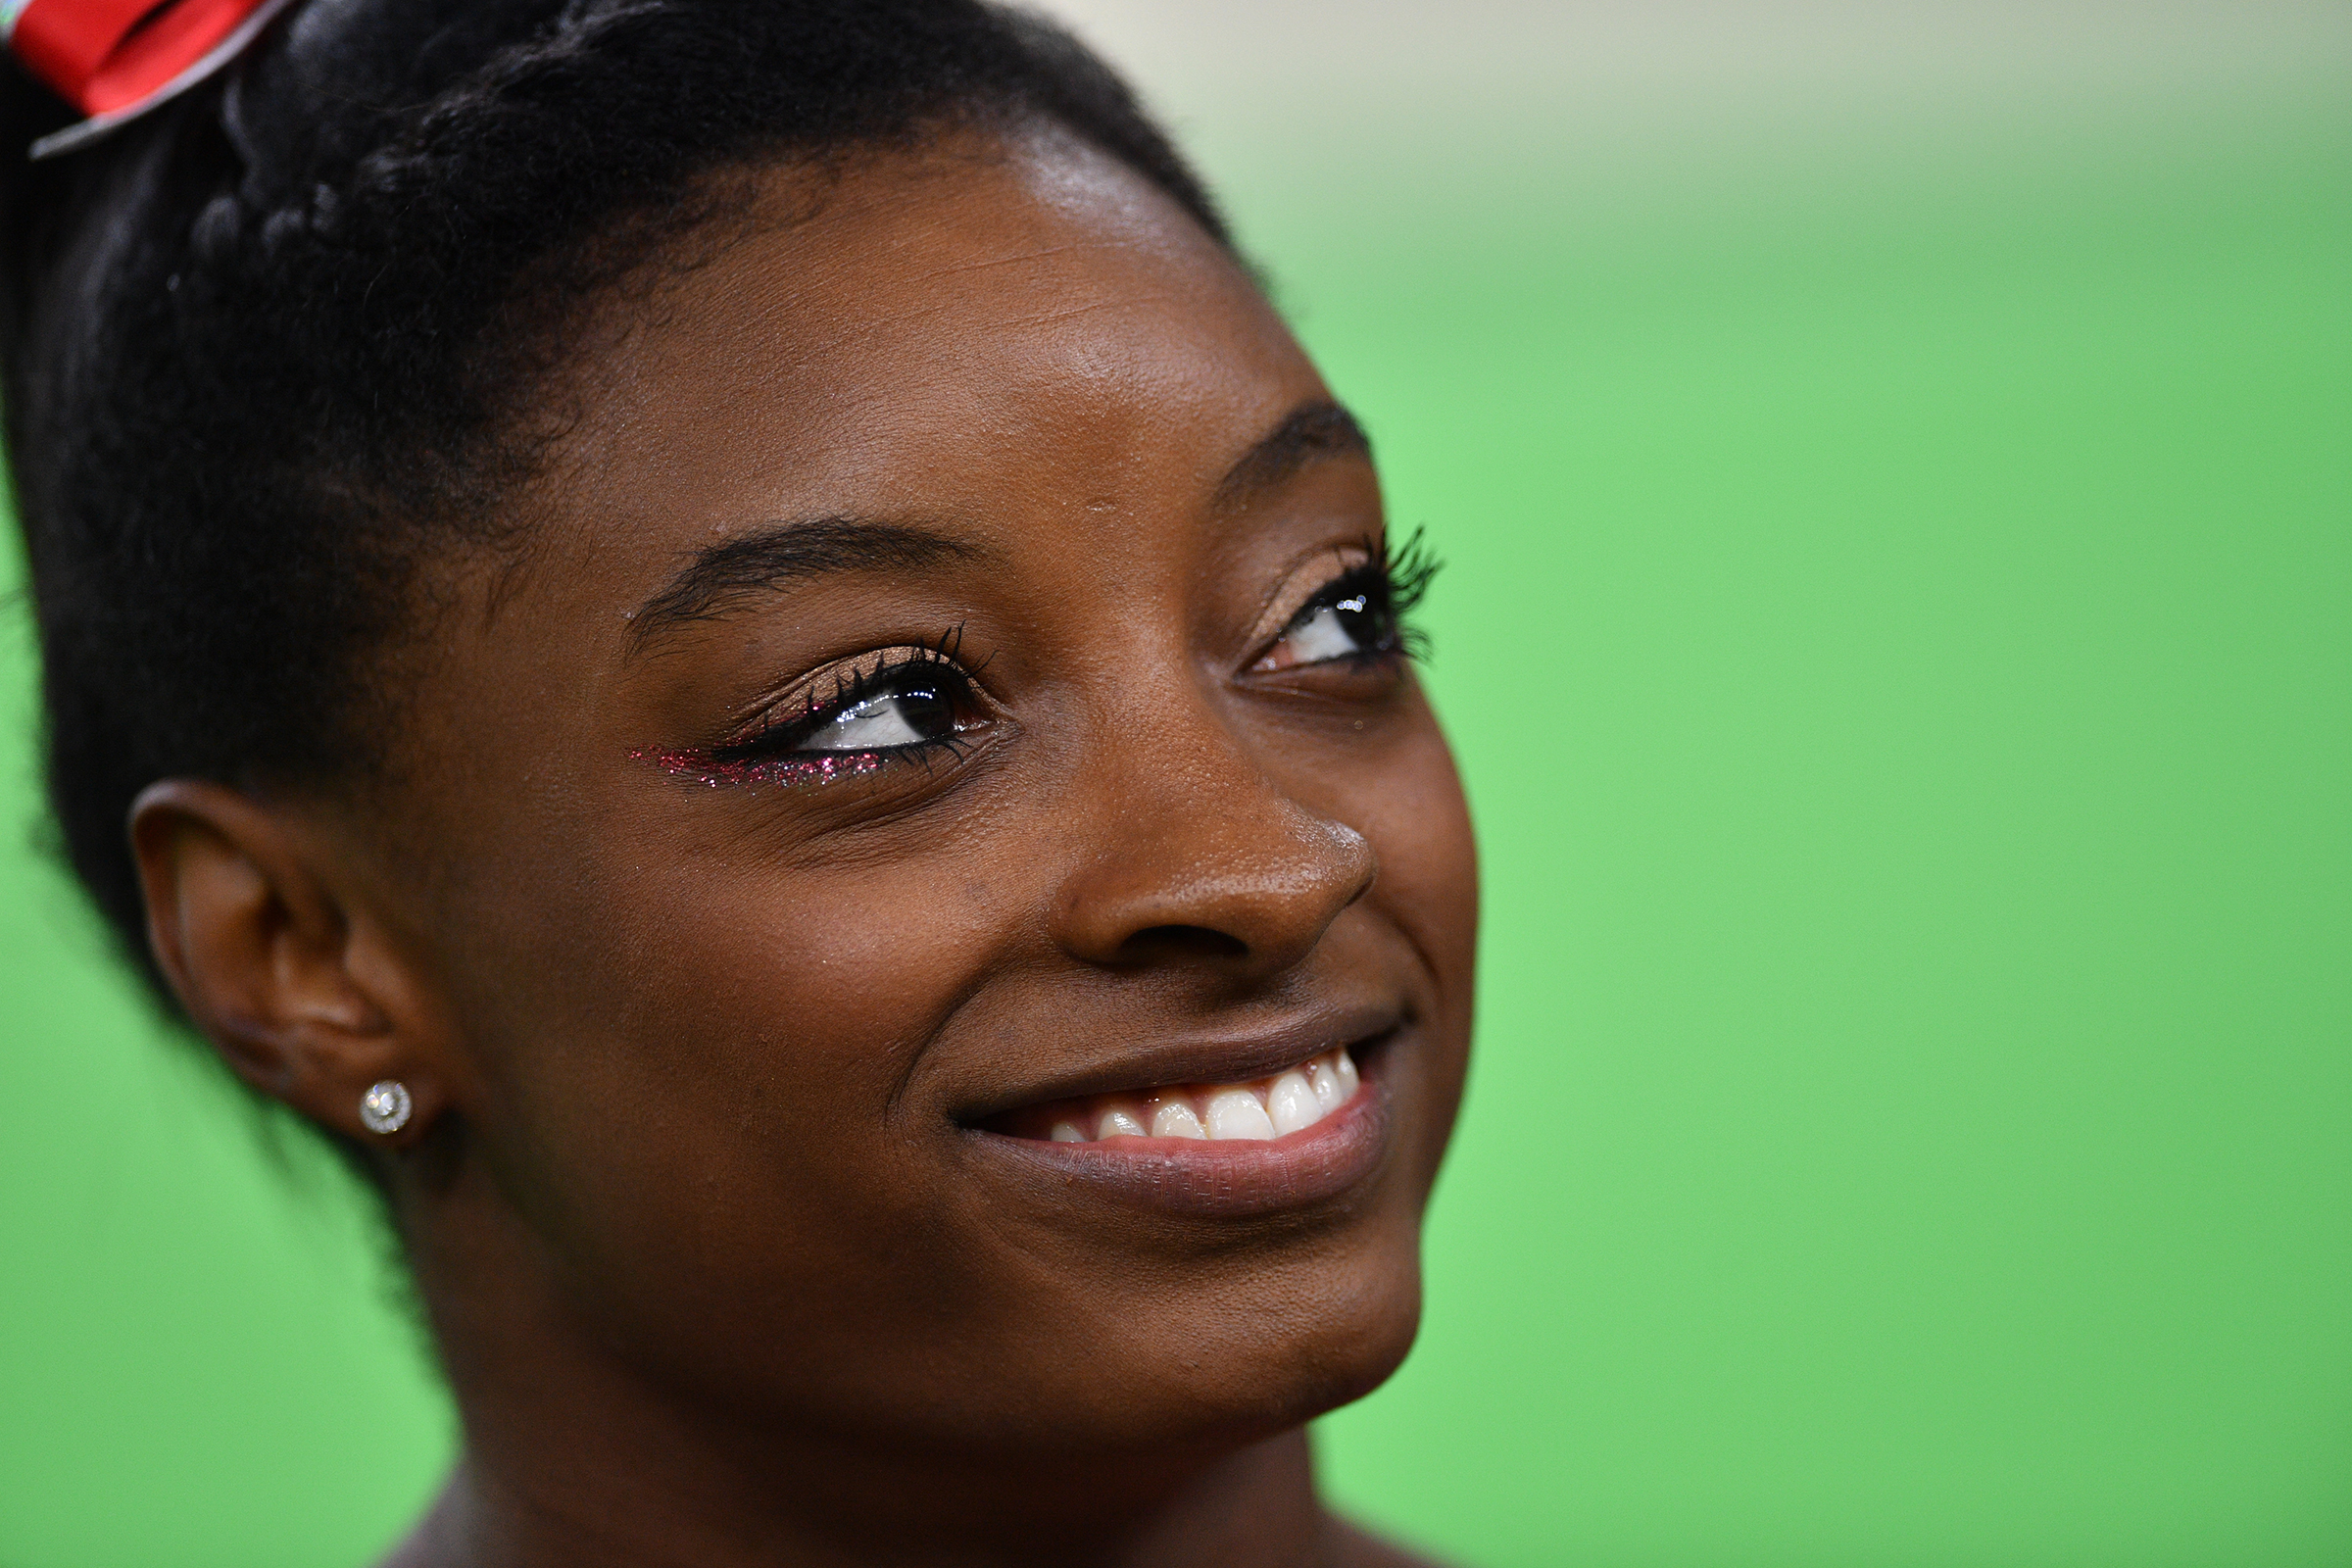 Simone Biles of the USA smiles during the Women's Vault Final at the Artistic Gymnastics events of the Rio 2016 Olympic Games at the Rio Olympic Arena in Rio de Janeiro, Brazil, 14 August 2016. Biles won the Gold medal. Photo: Lukas Schulze/dpa